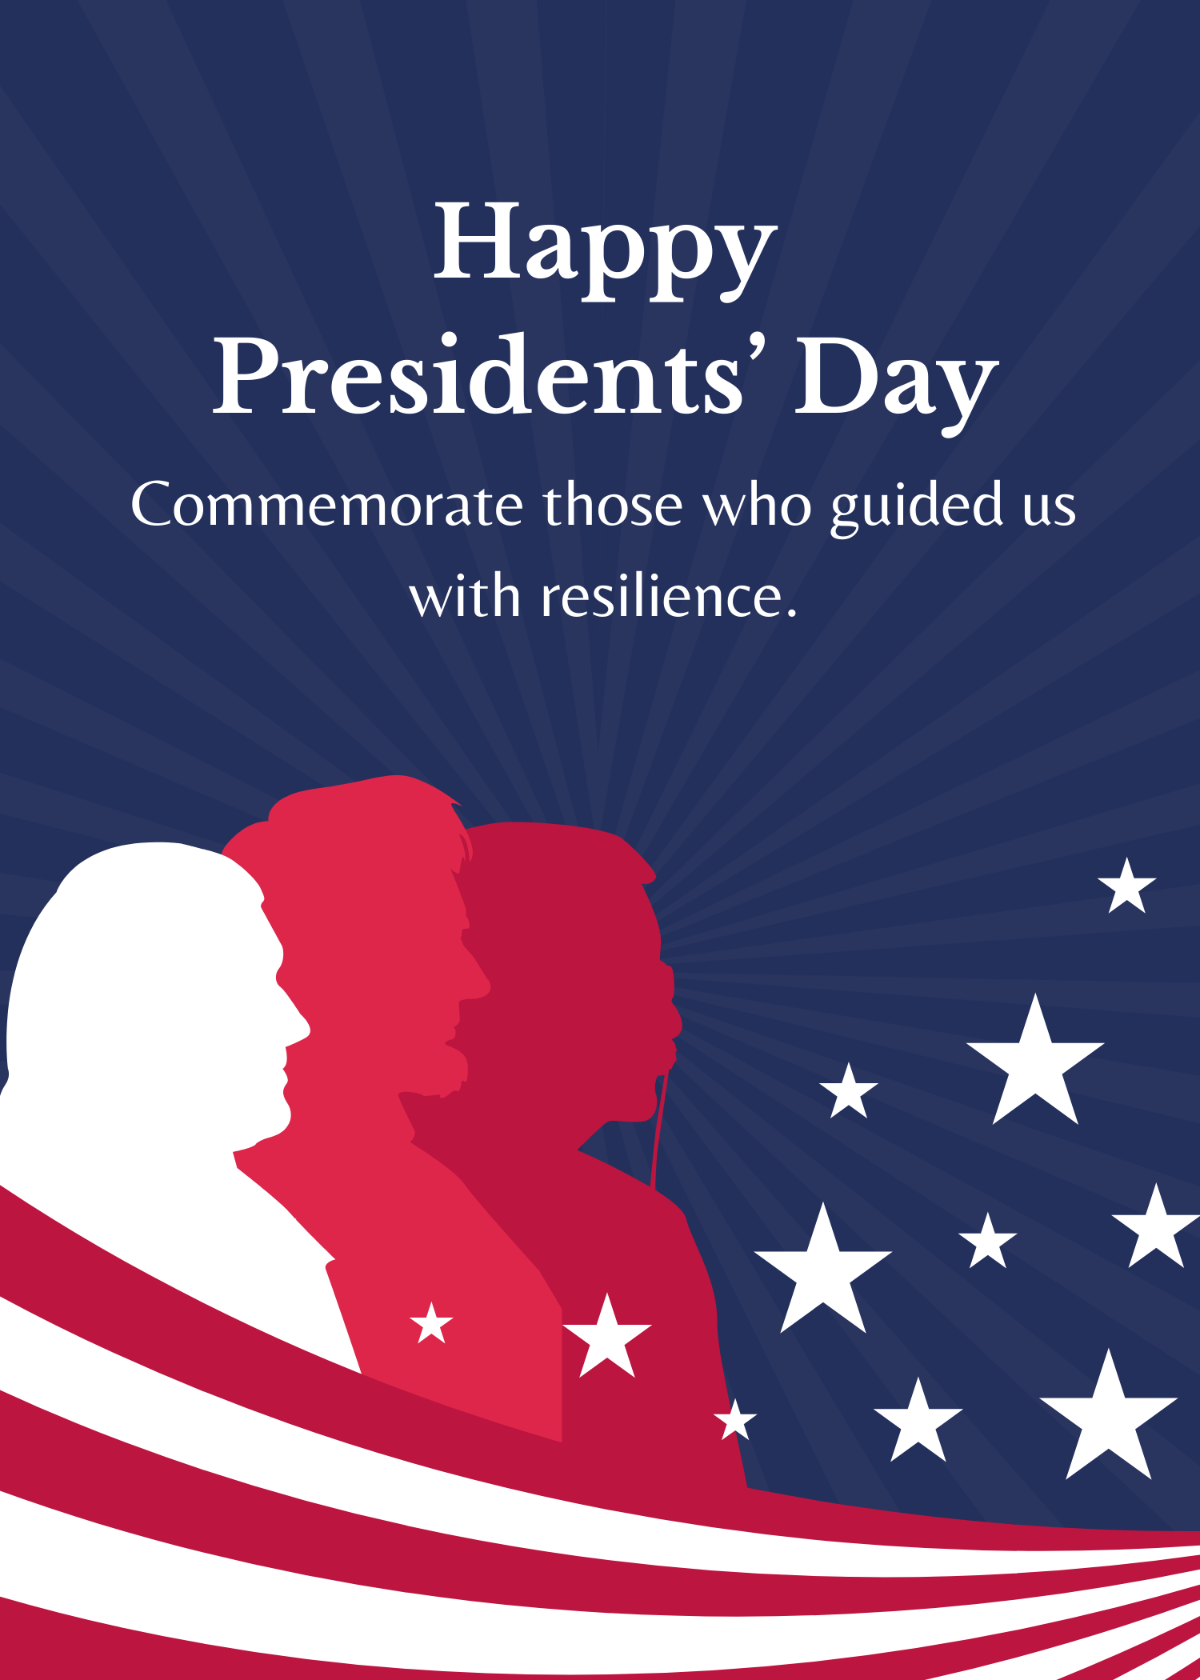 Happy President's Day Greetings Template